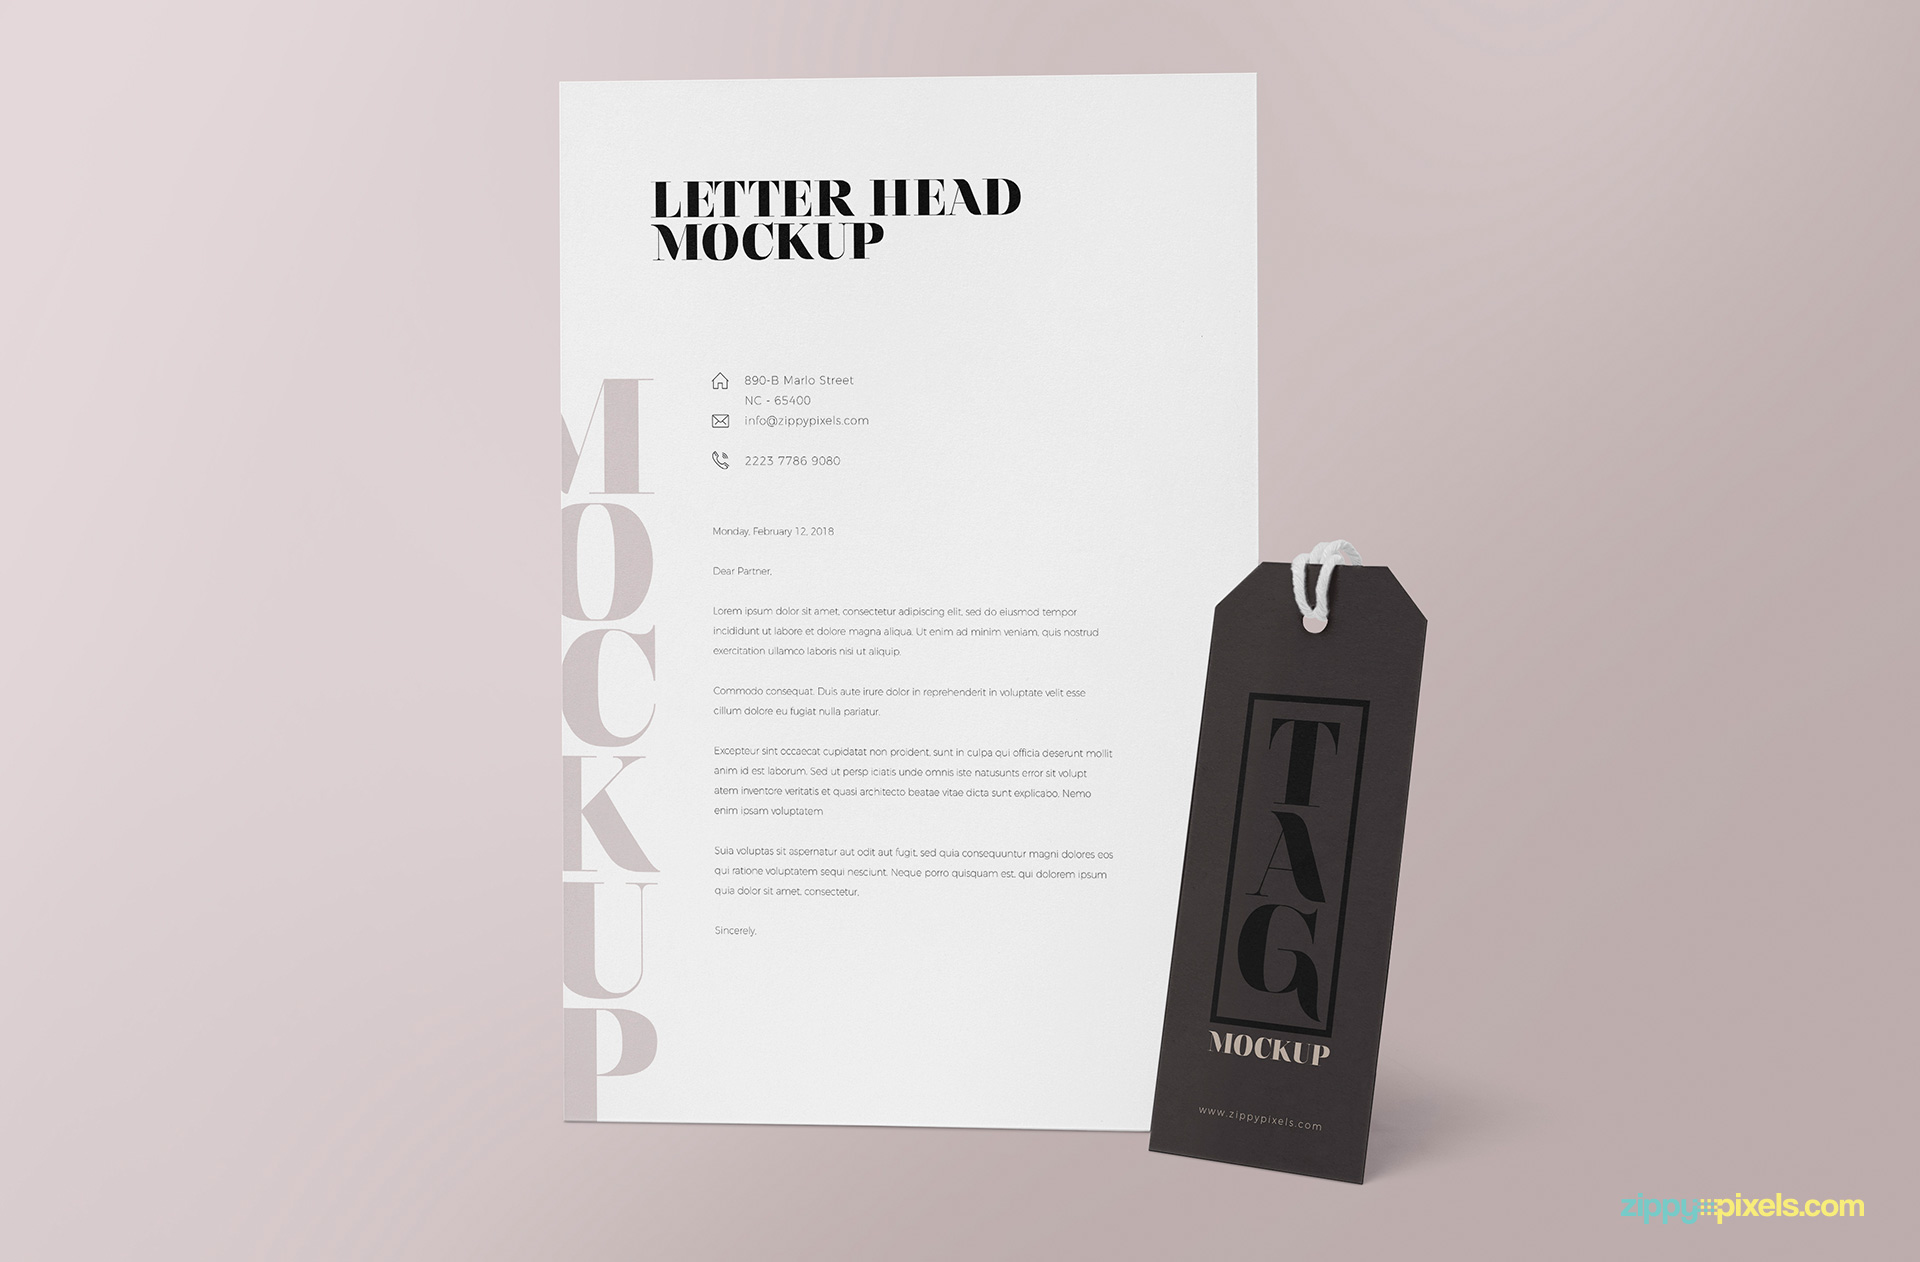 Adjustable effects of this letter mockup free PSD.